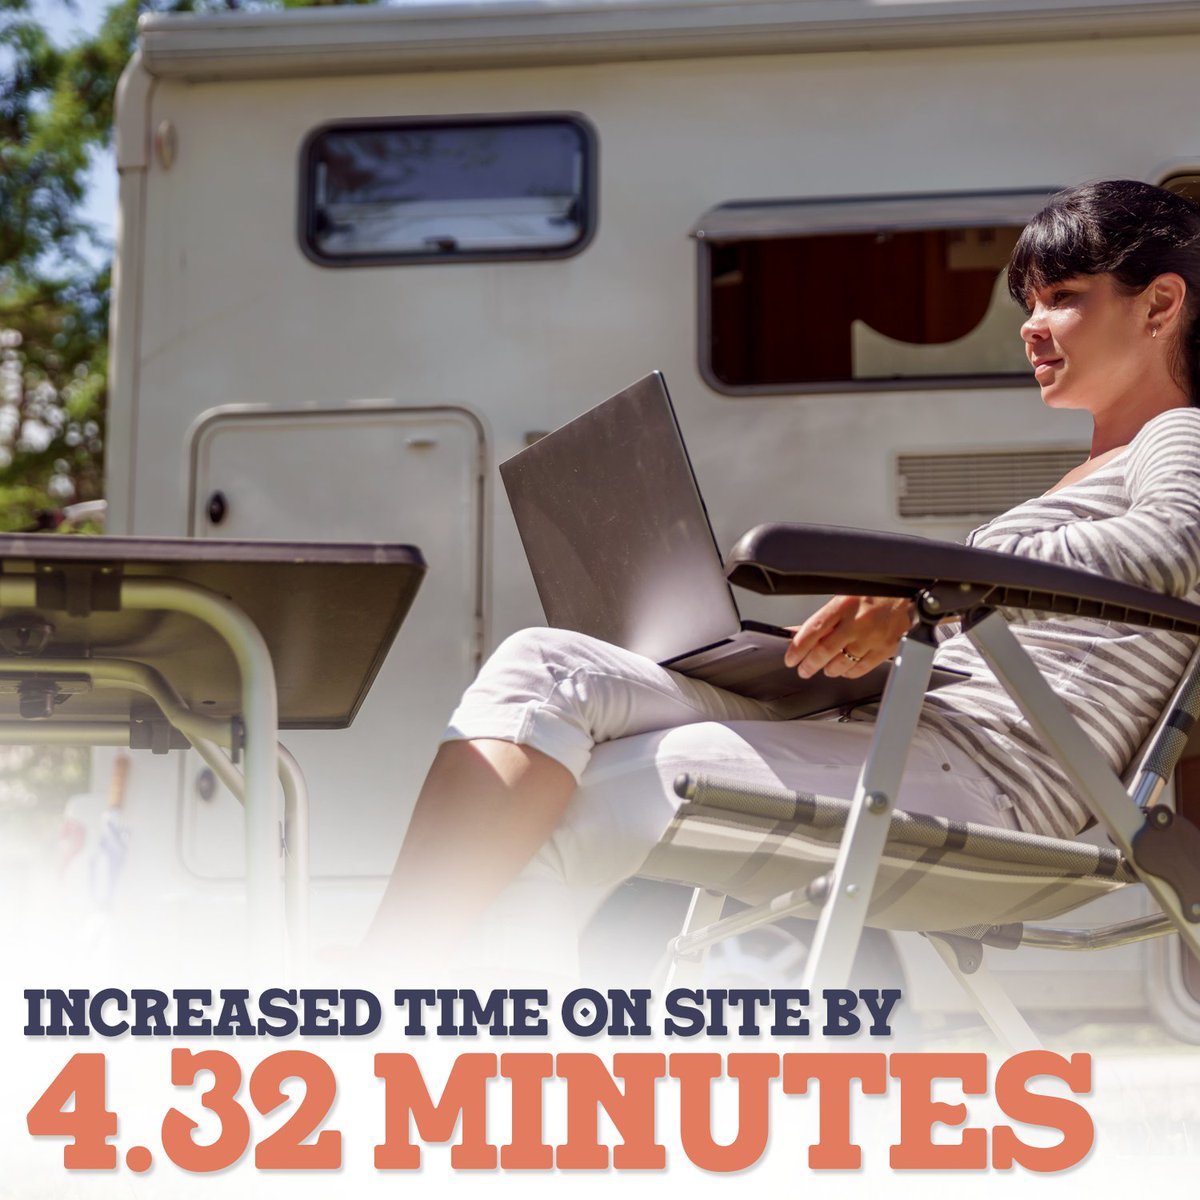 We strive to keep your customers interested and engaged once they reach your website. With an average increase of 4.32 minutes on-site, our work speaks for itself! 

#Kingwillycamping #camping #campgroundmarketing #custommarketing #campground #googlepartner #googleads